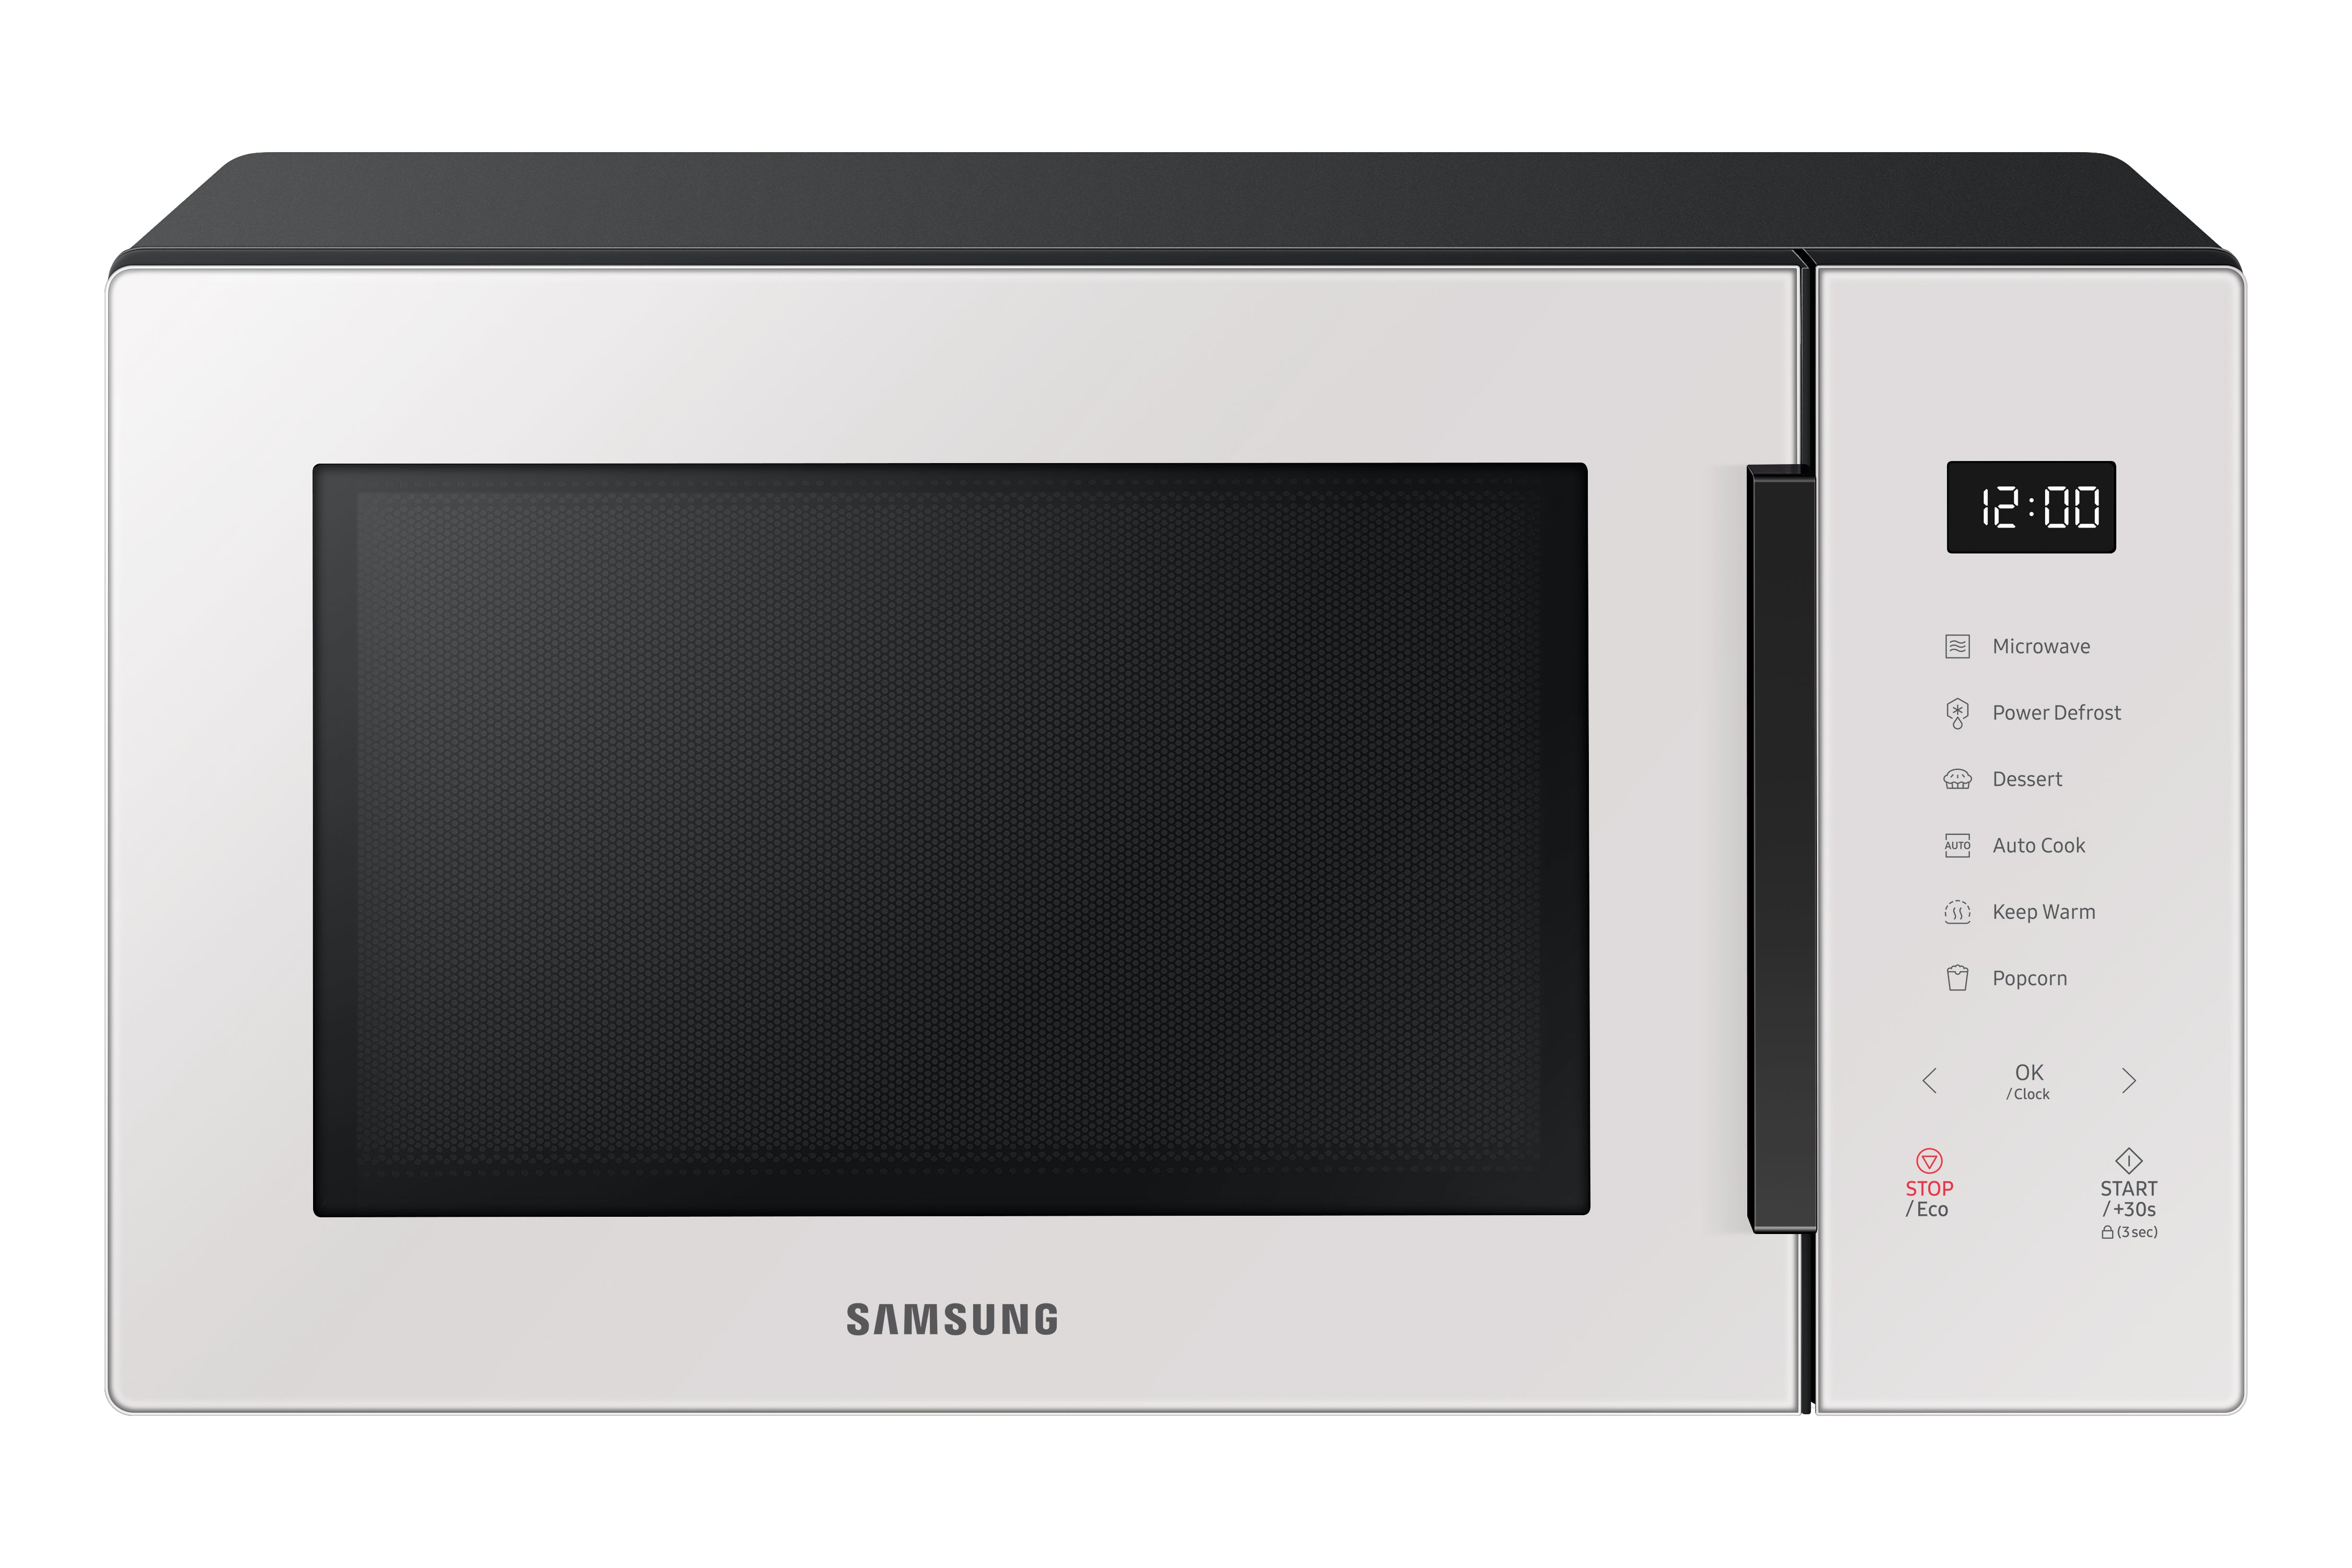 Samsung - 1.1 cu. Ft  Counter top Microwave in White - MS11T5018AE